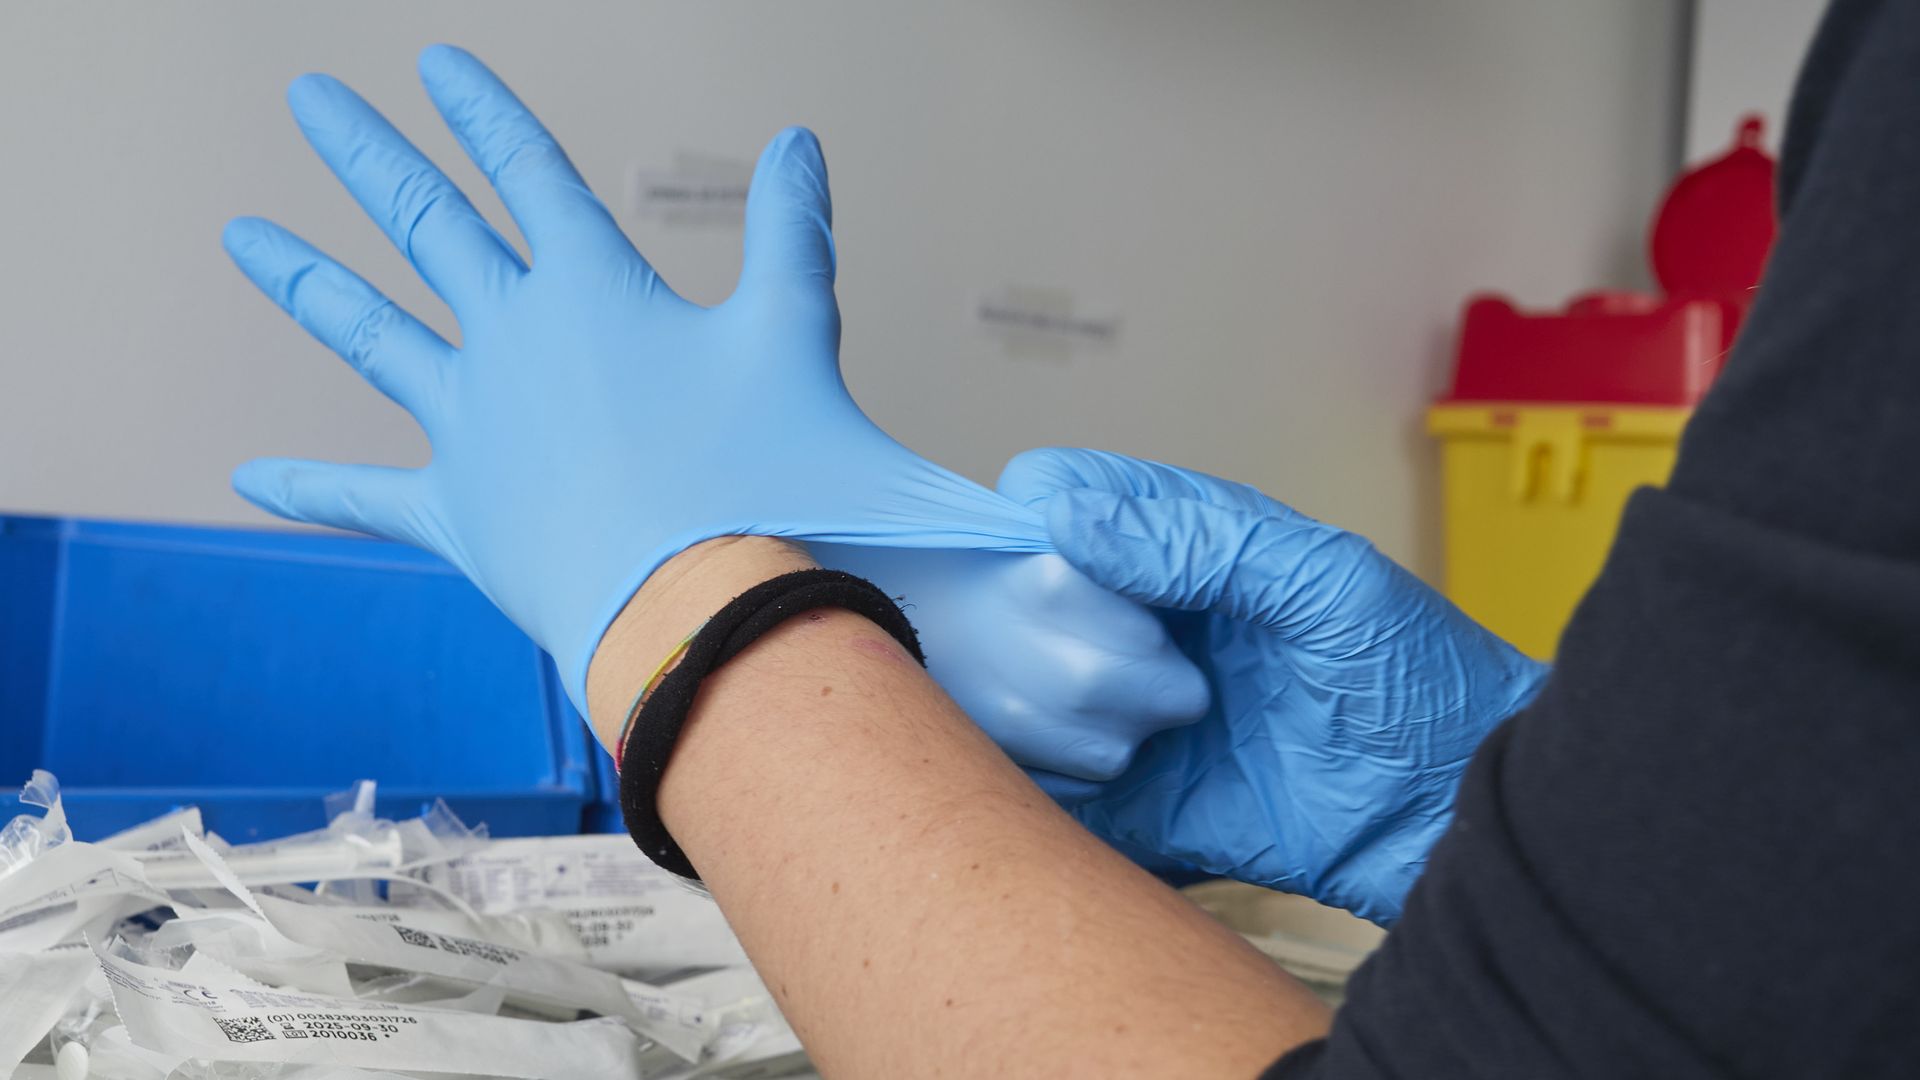 A health professional puts on nitrile gloves.